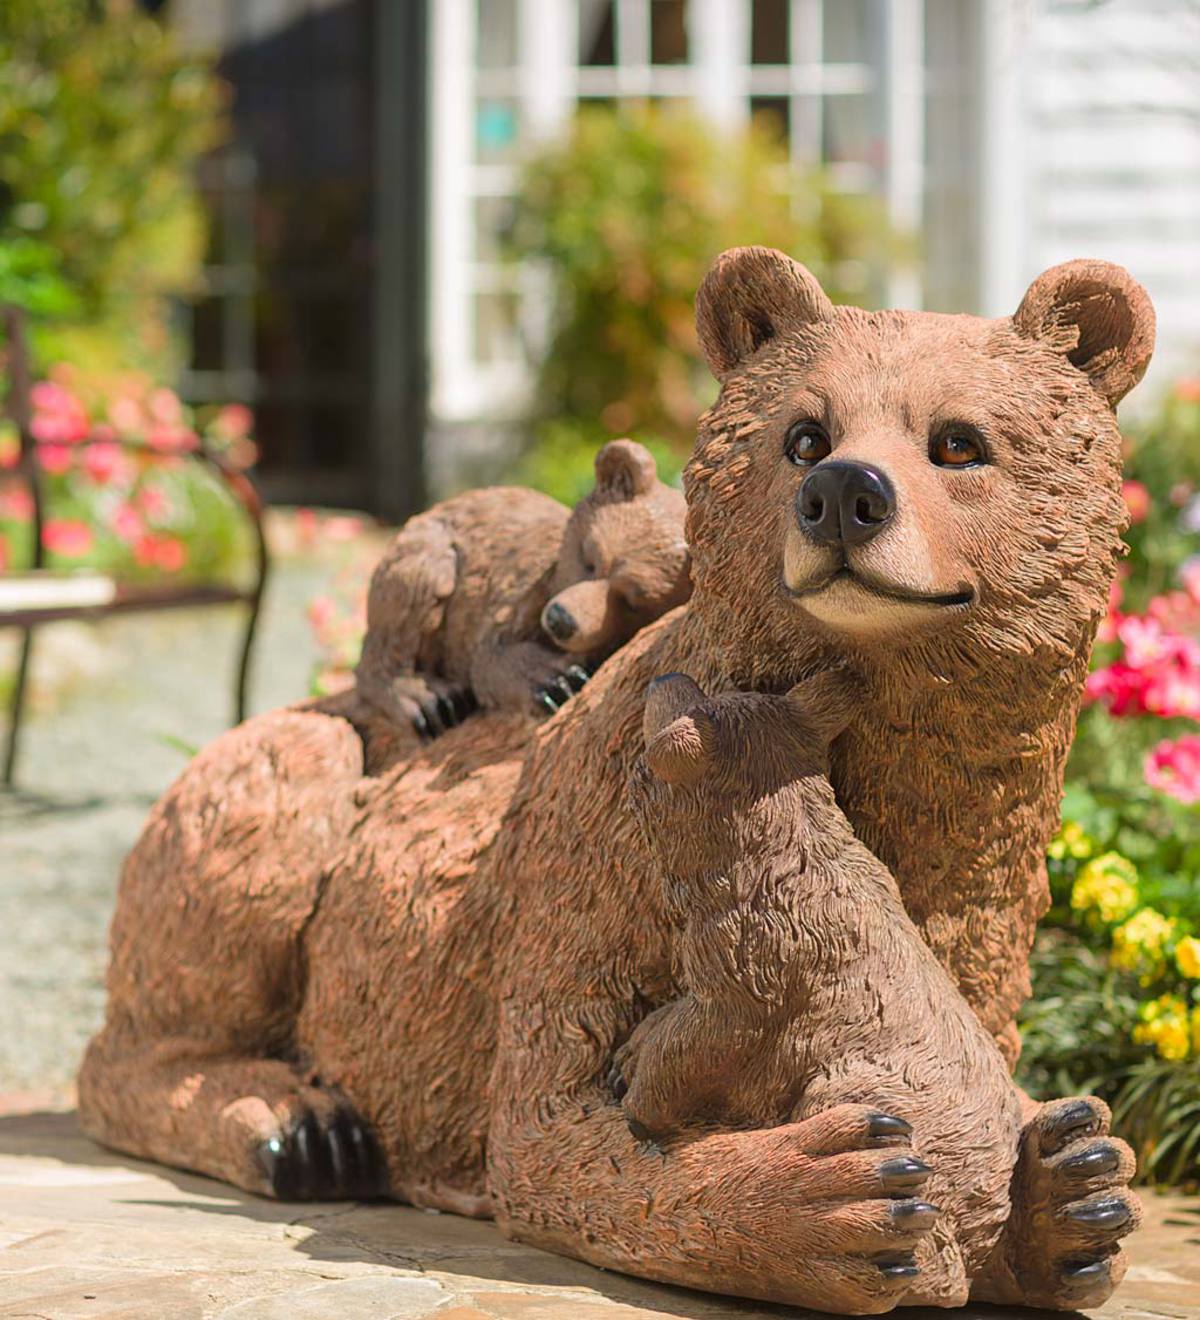 Mama and Baby Bears Sculpture